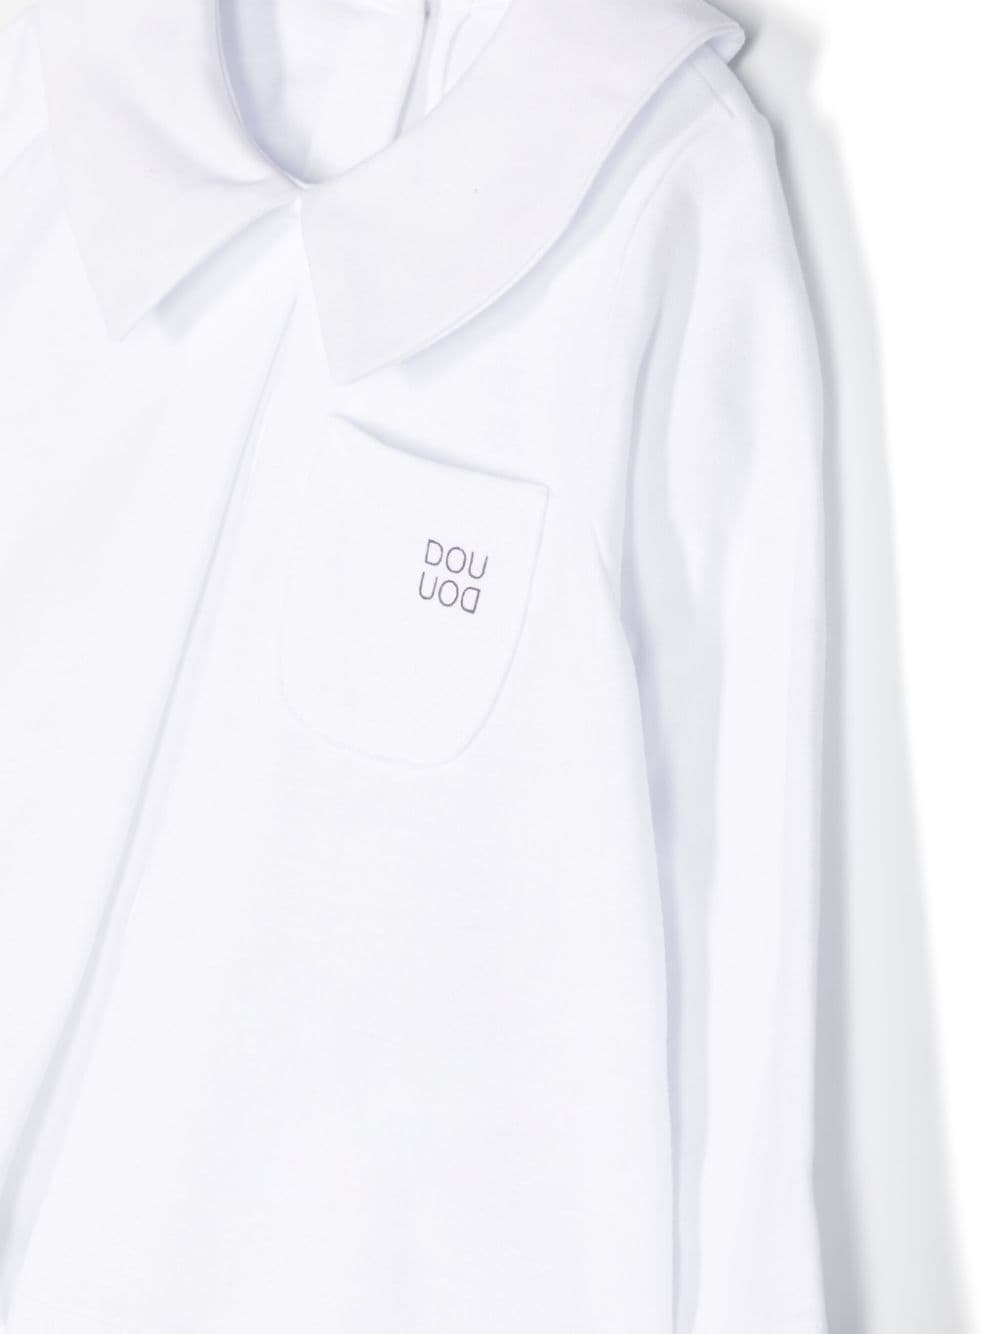 White blouse for girls with logo